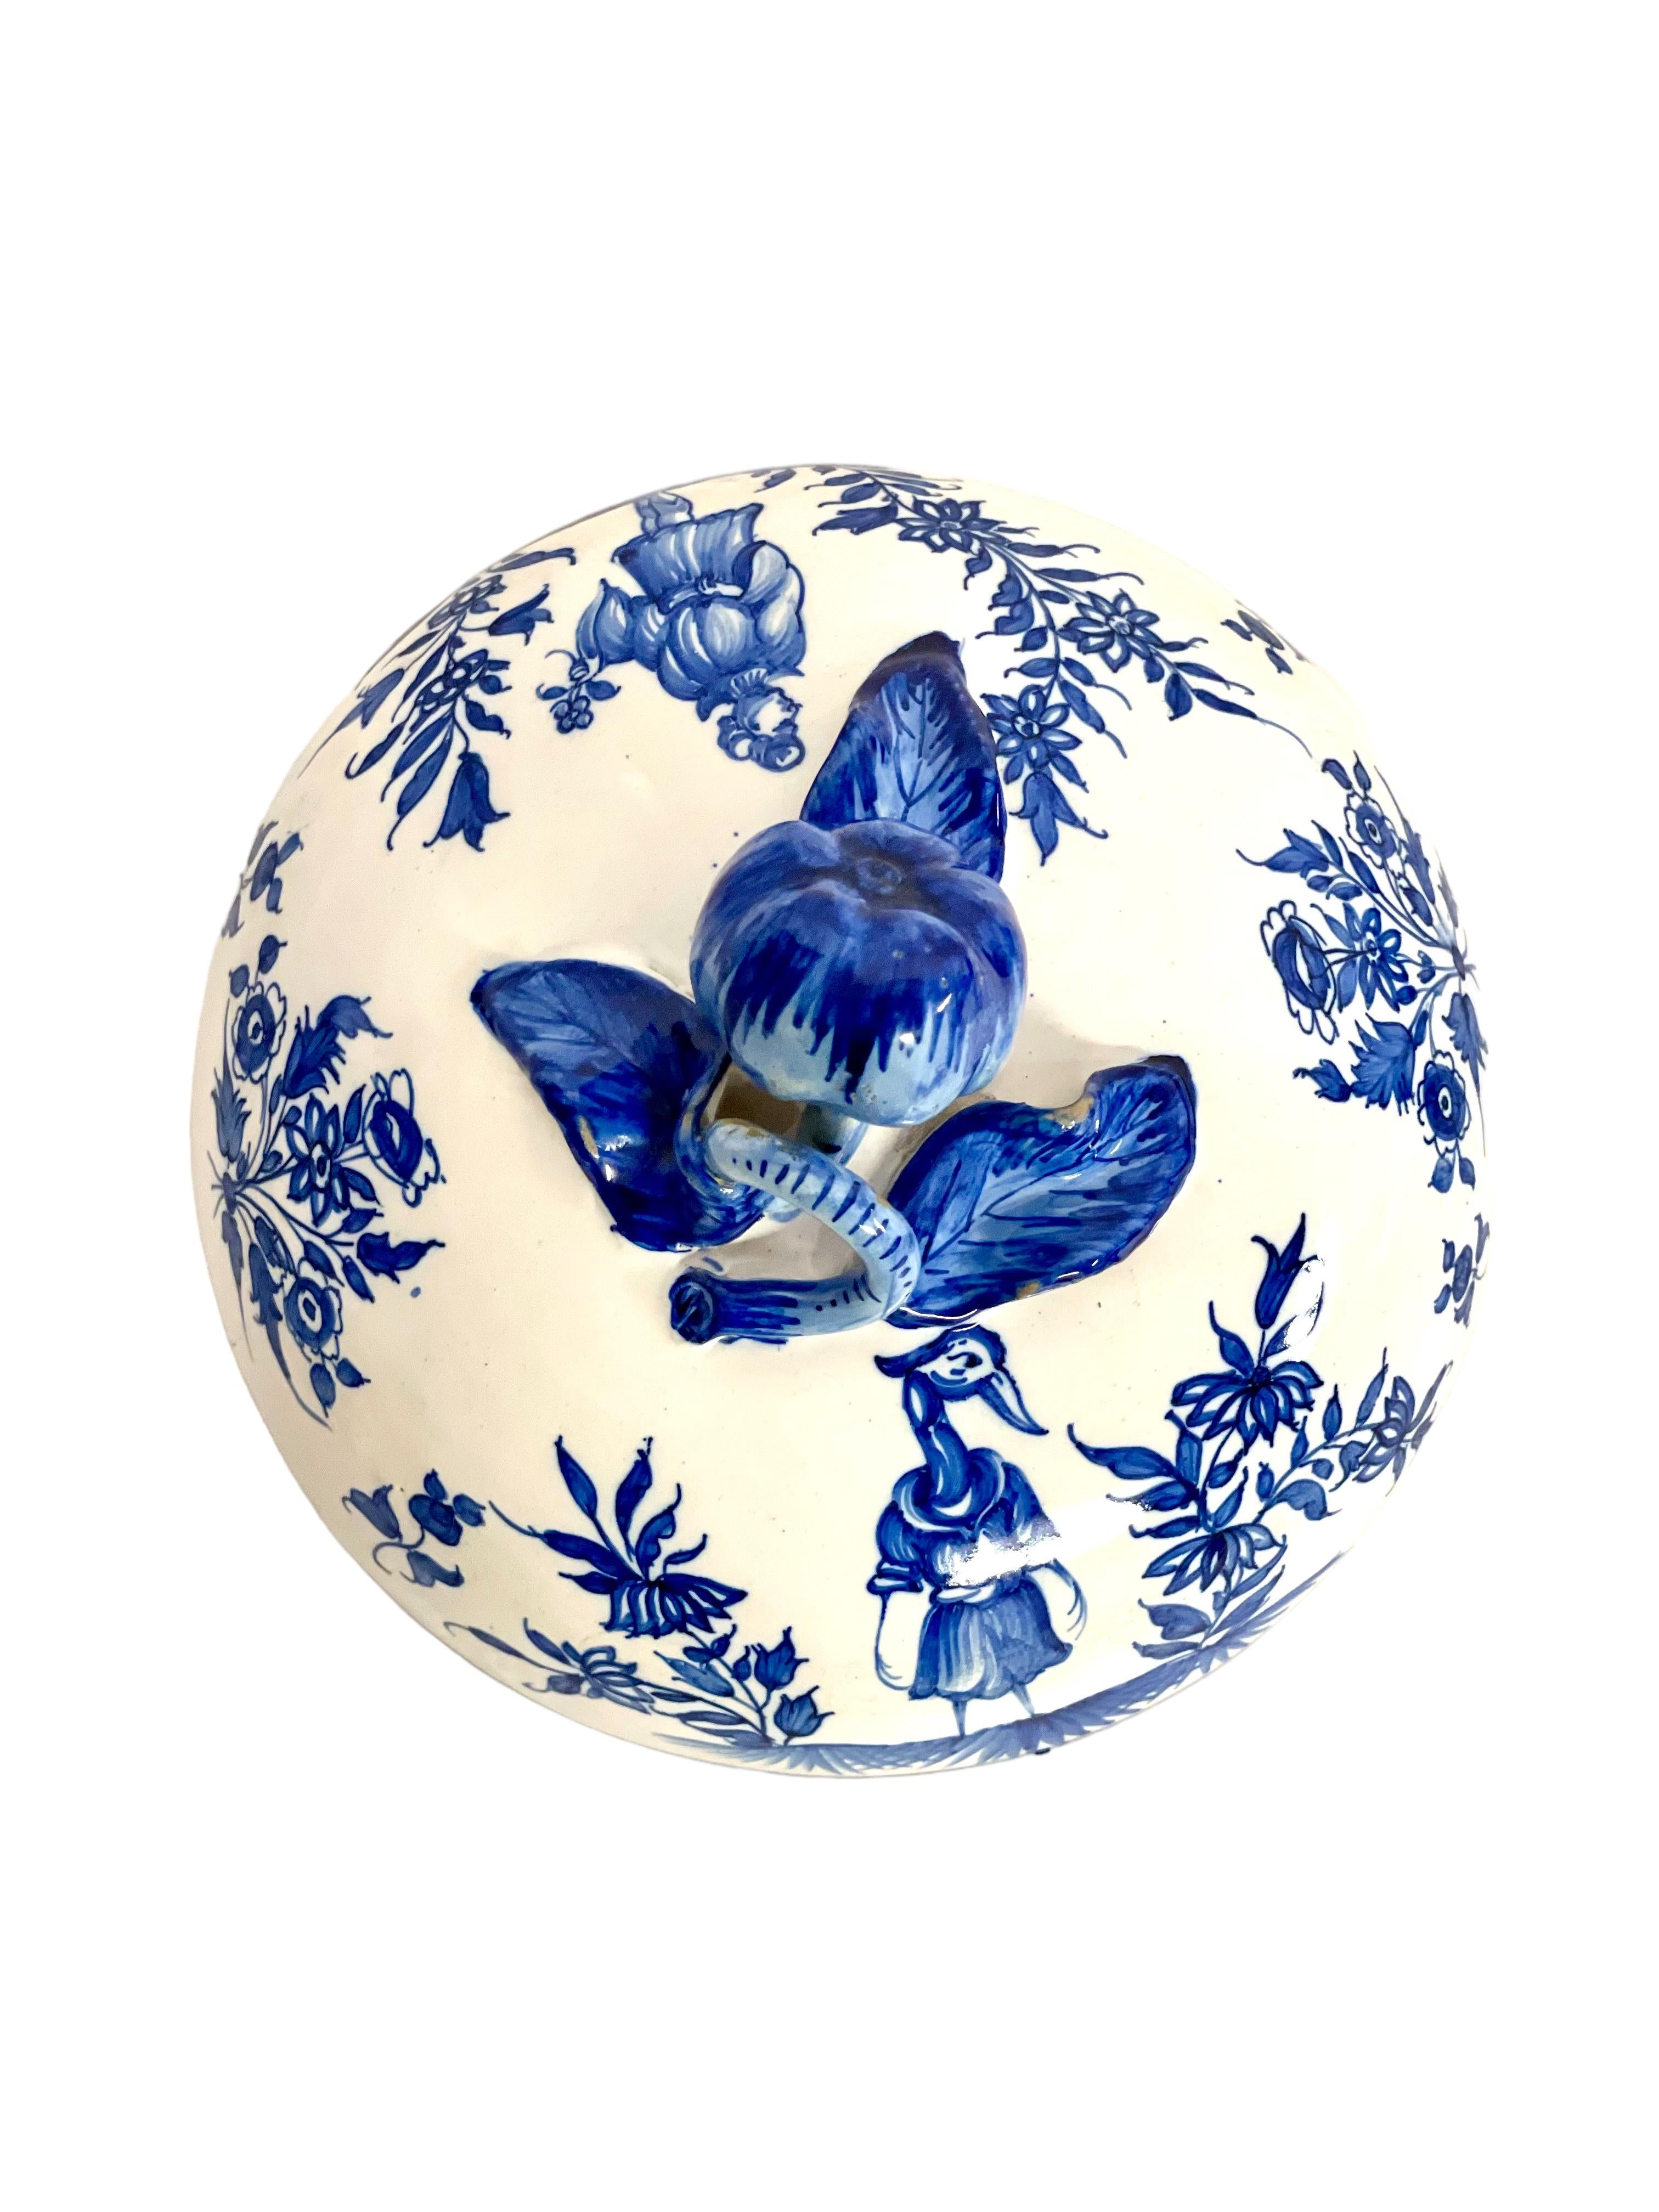 Blue and White Earthenware Lidded Tureen with Fantastical Decoration For Sale 3